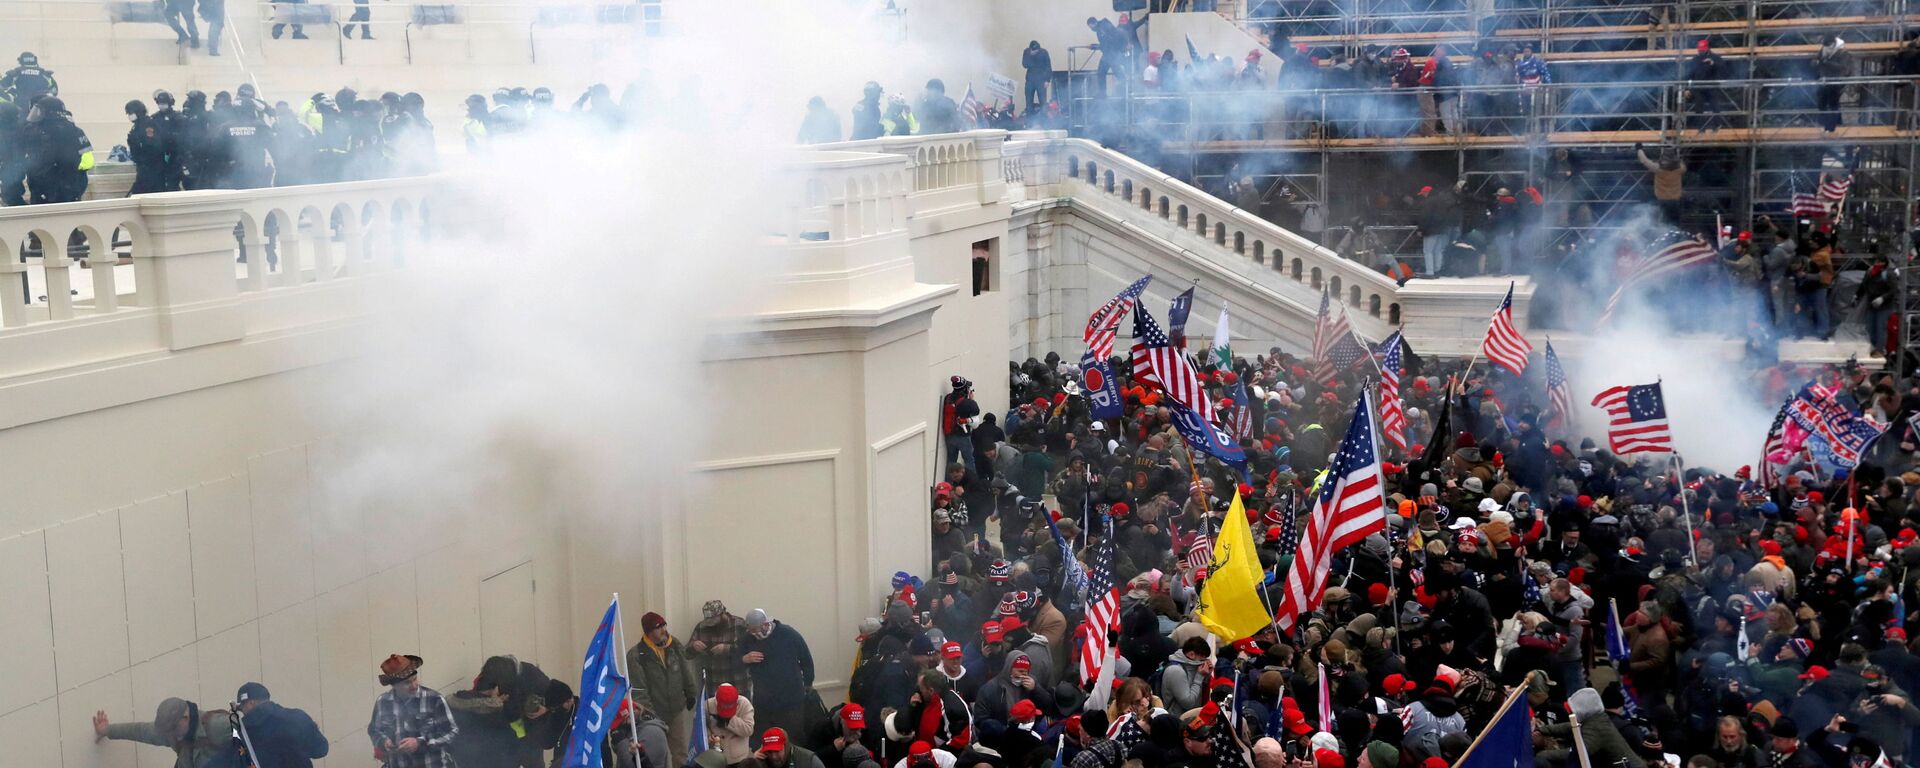 Police release tear gas into a crowd of pro-Trump protesters during clashes at a rally to contest the certification of the 2020 U.S. presidential election results by the U.S. Congress, at the U.S. Capitol Building in Washington, U.S, January 6, 2021. - Sputnik International, 1920, 08.09.2021